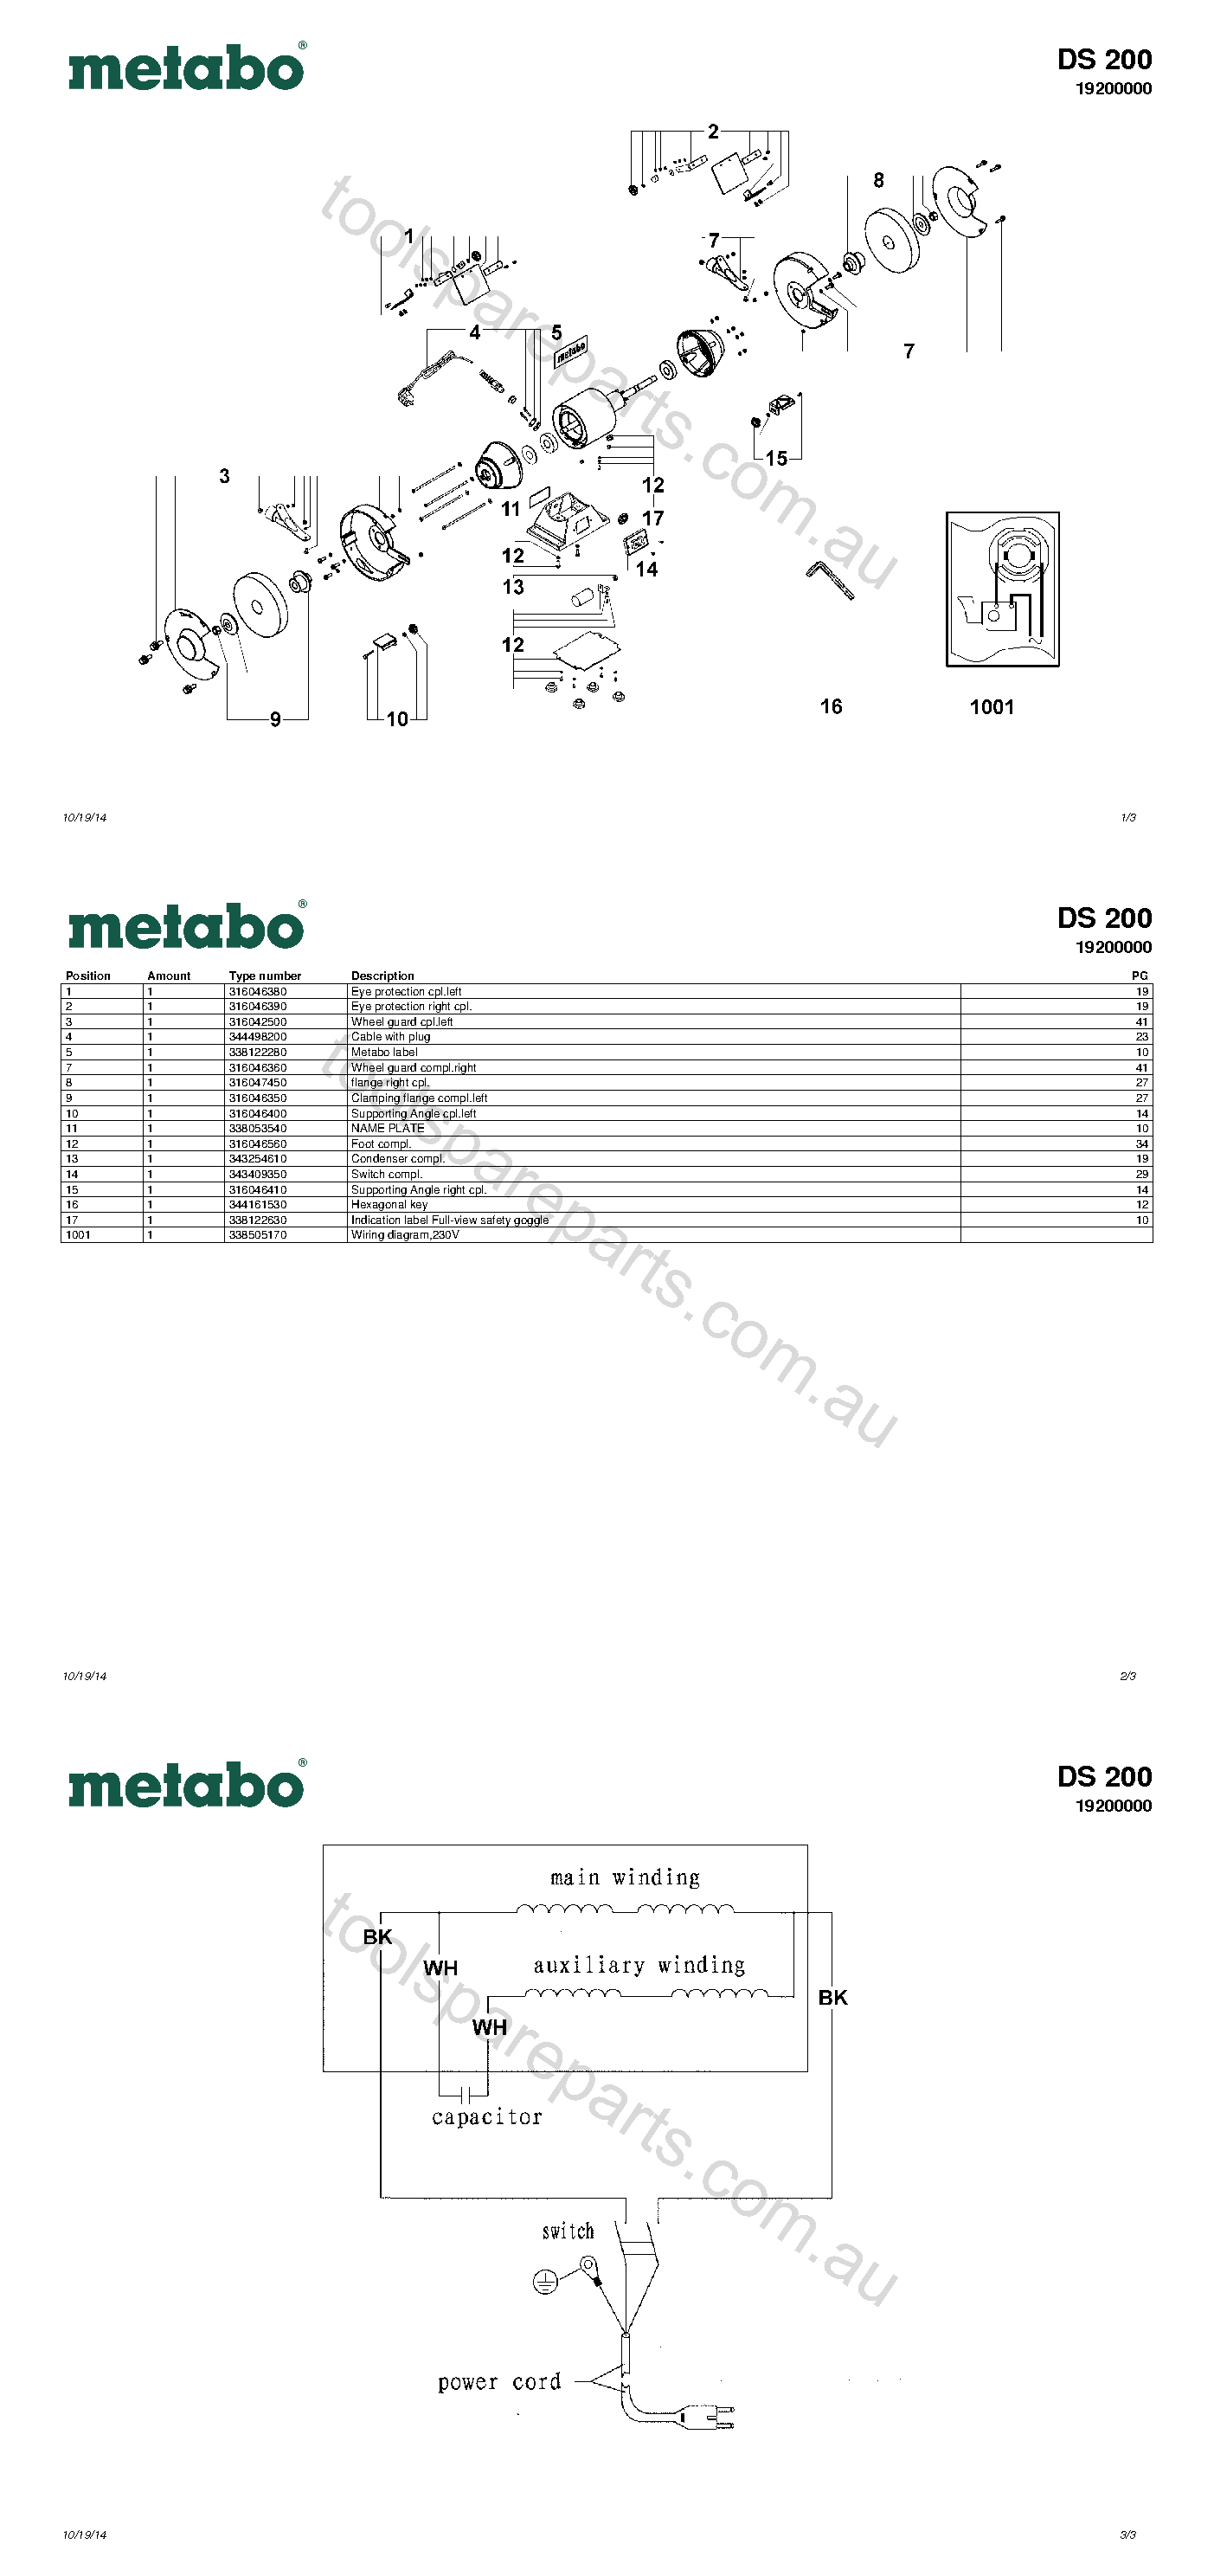 Metabo DS 200 19200000  Diagram 1